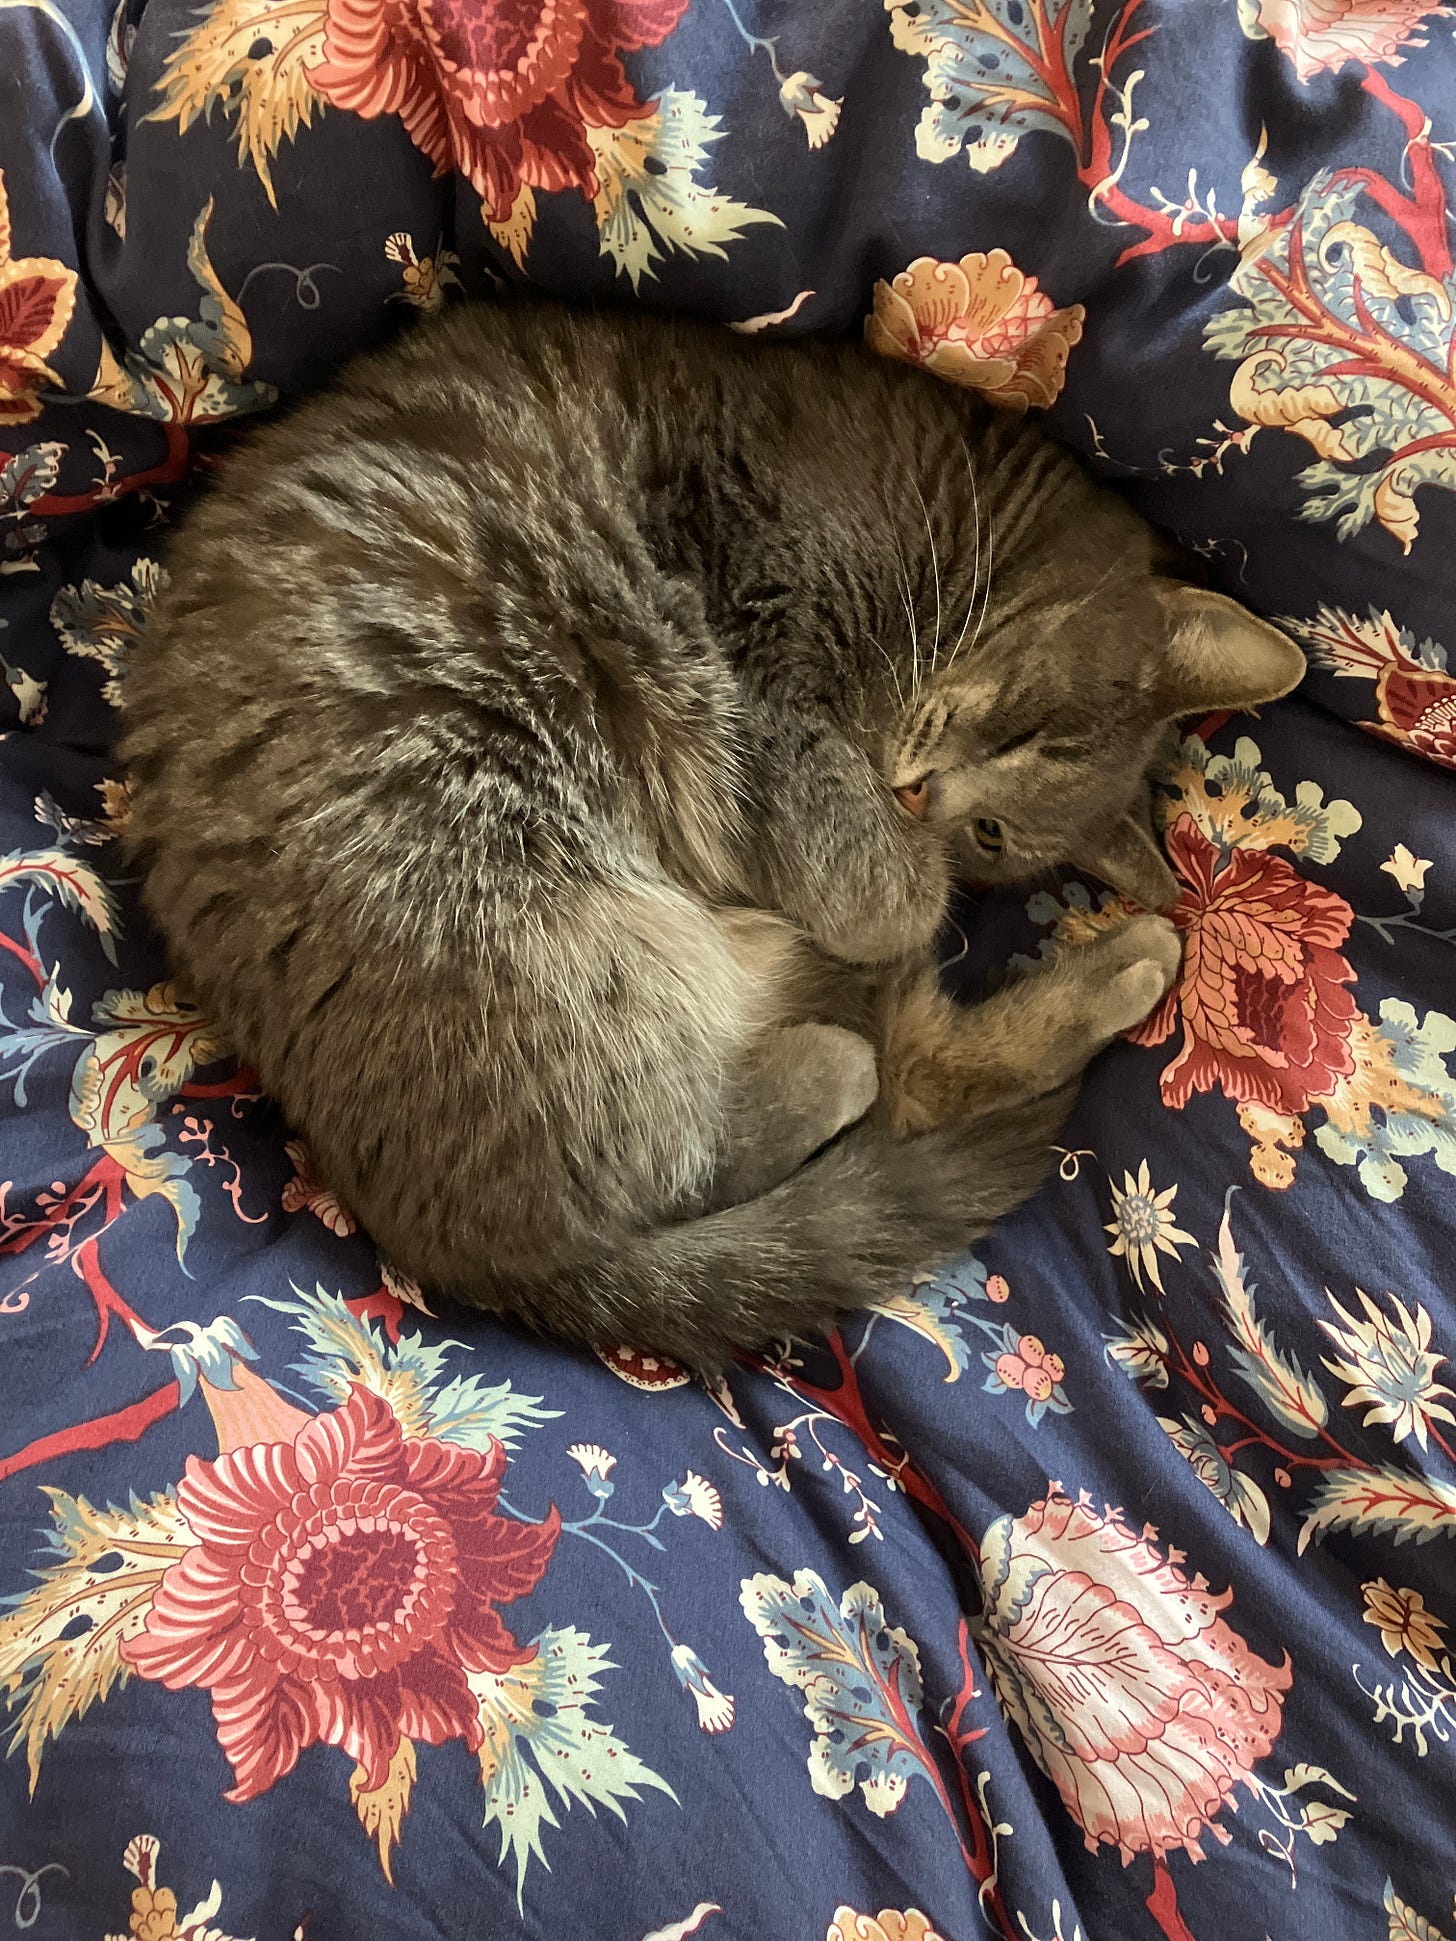 My cat, Friday, curled into a cute little ball on a navy blue floral comforter cover.